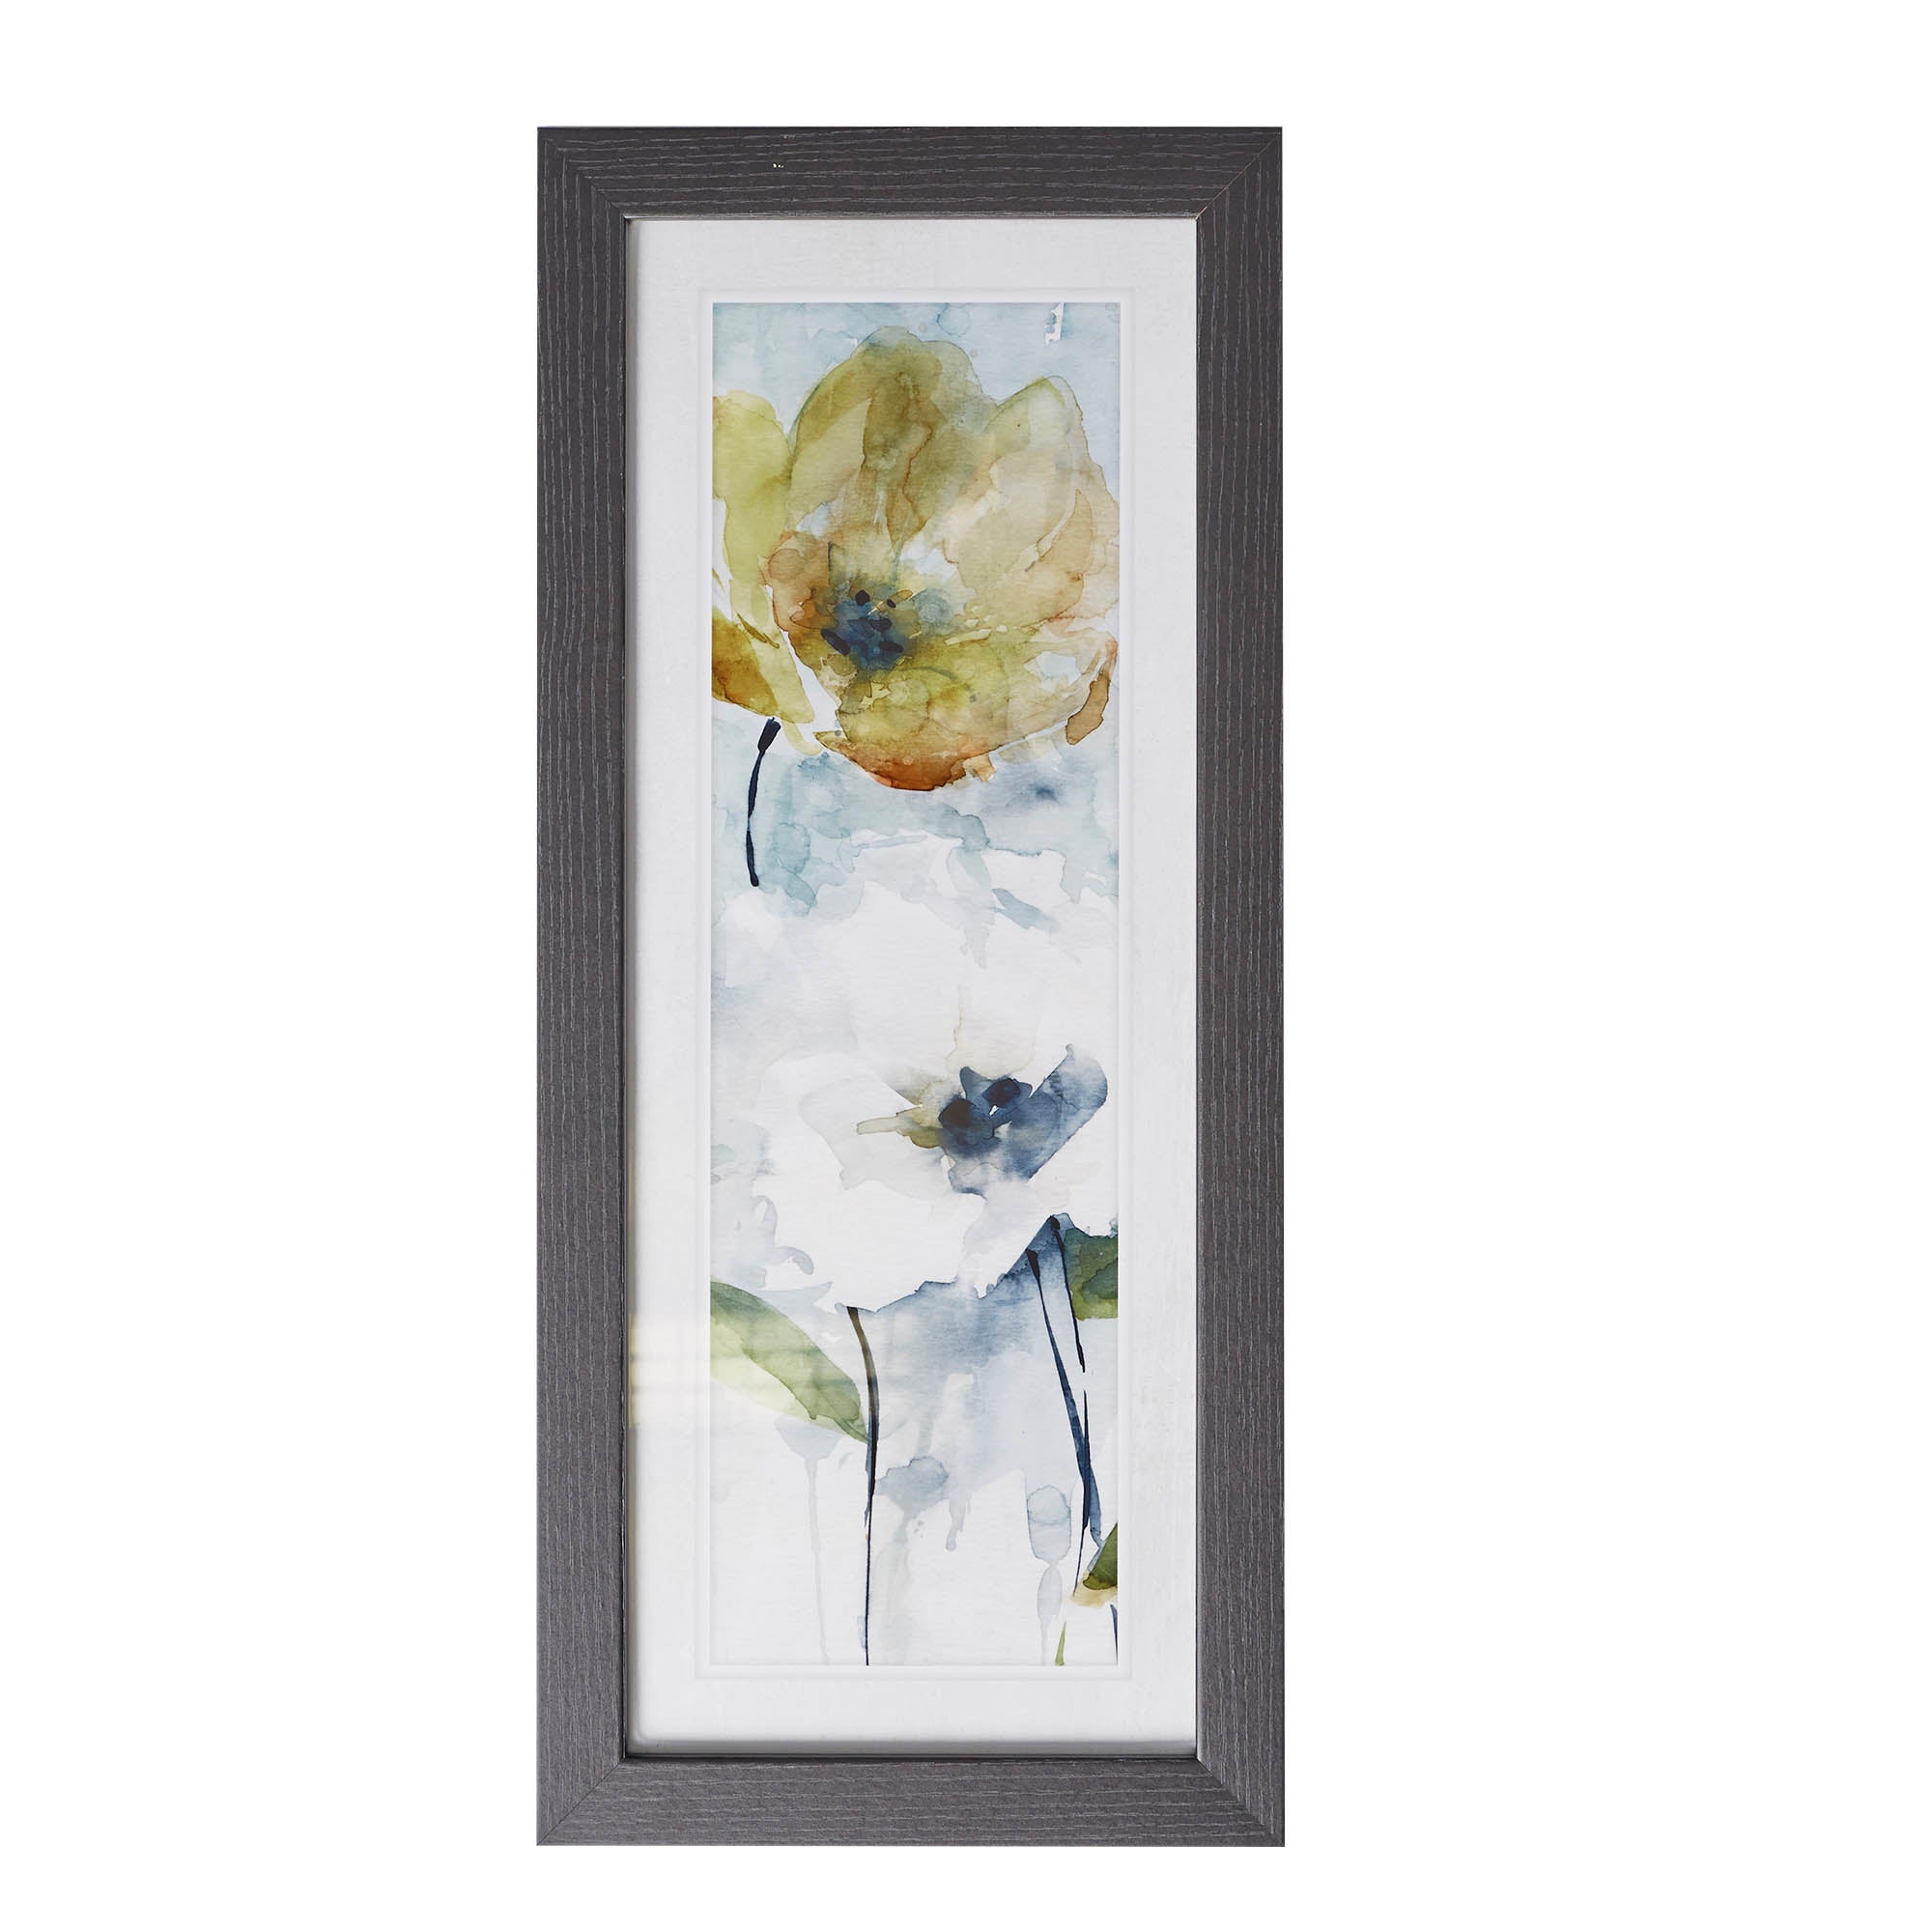 Canvases and Prints | Dunelm - Page 7